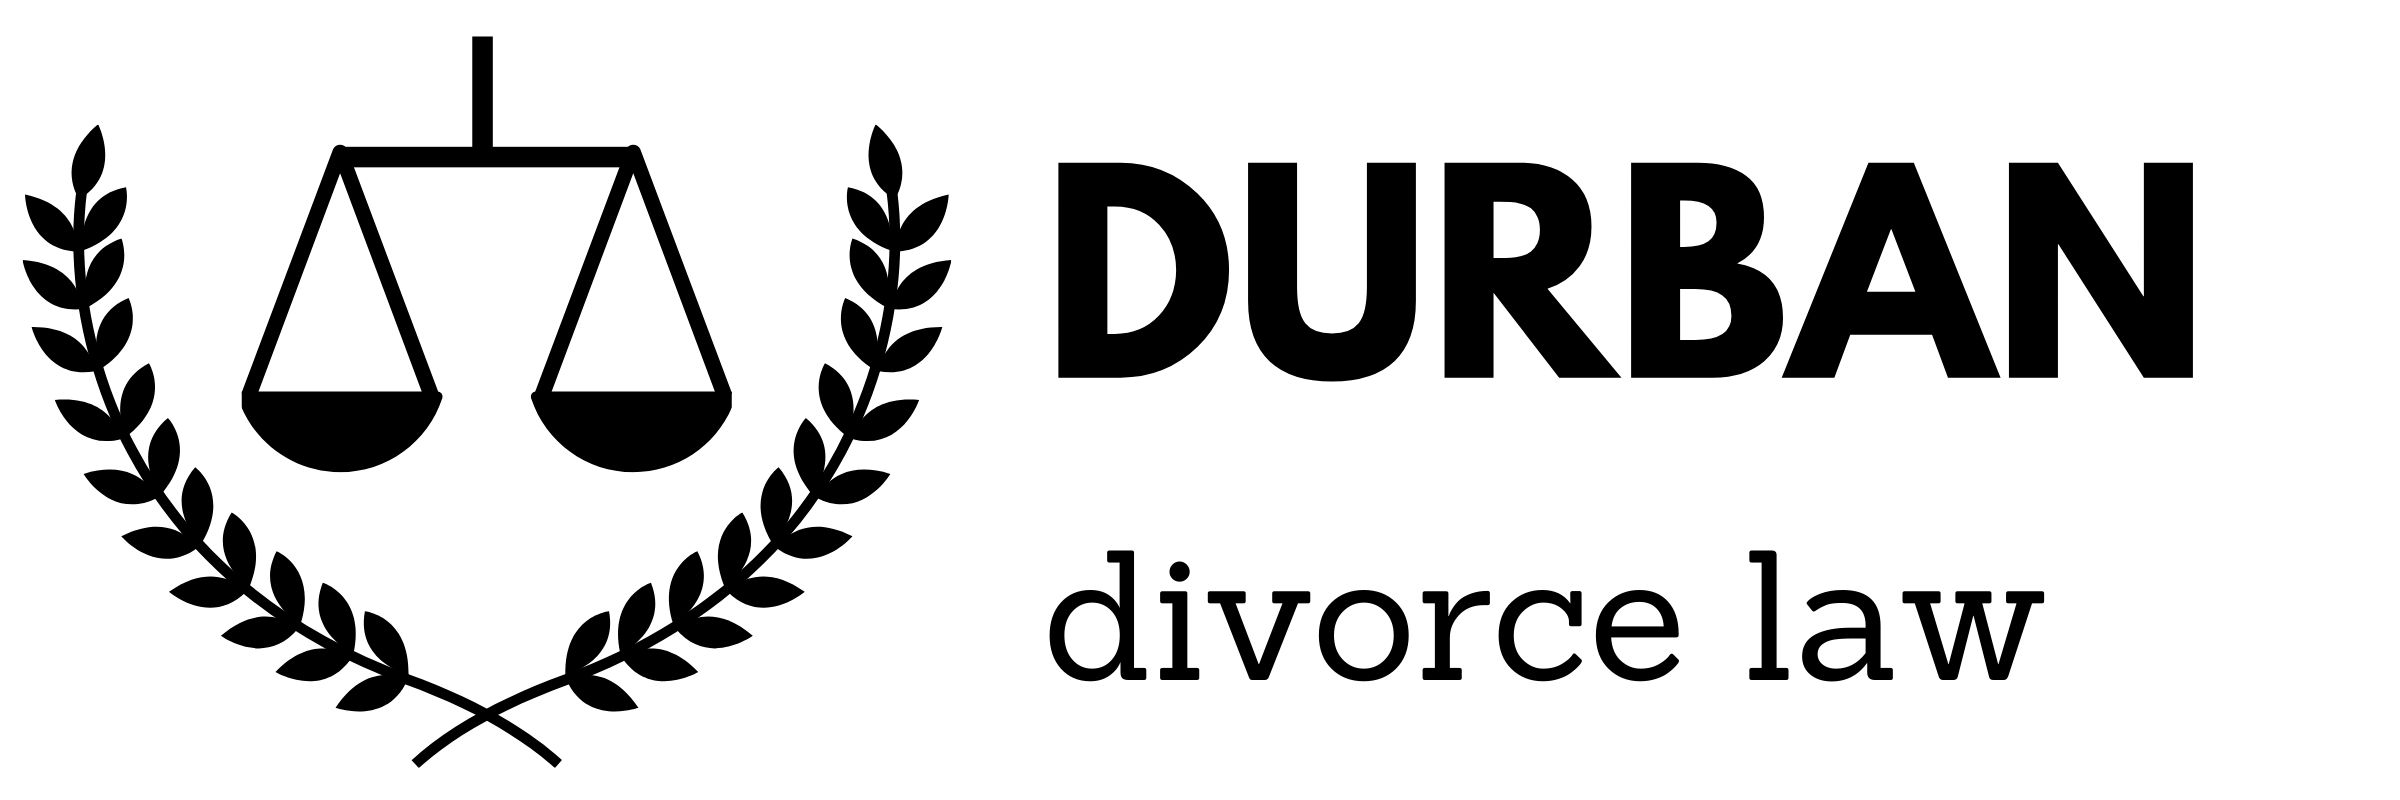 Divorce Lawyers in Durban | Call Us Today on +27 87 2500 831